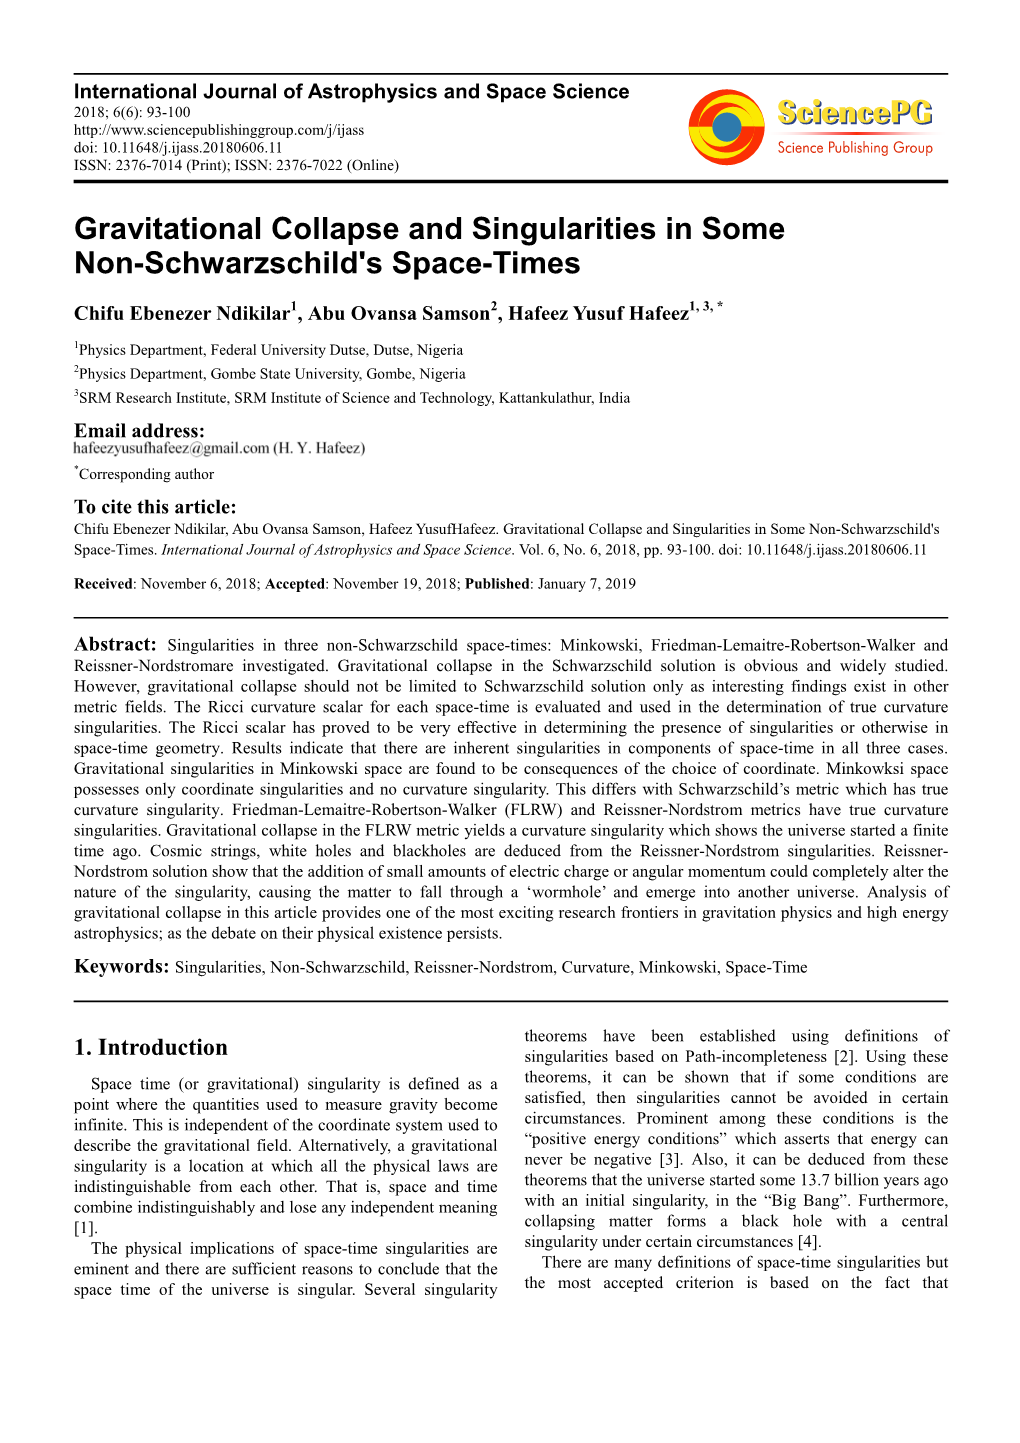 Gravitational Collapse and Singularities in Some Non-Schwarzschild's Space-Times